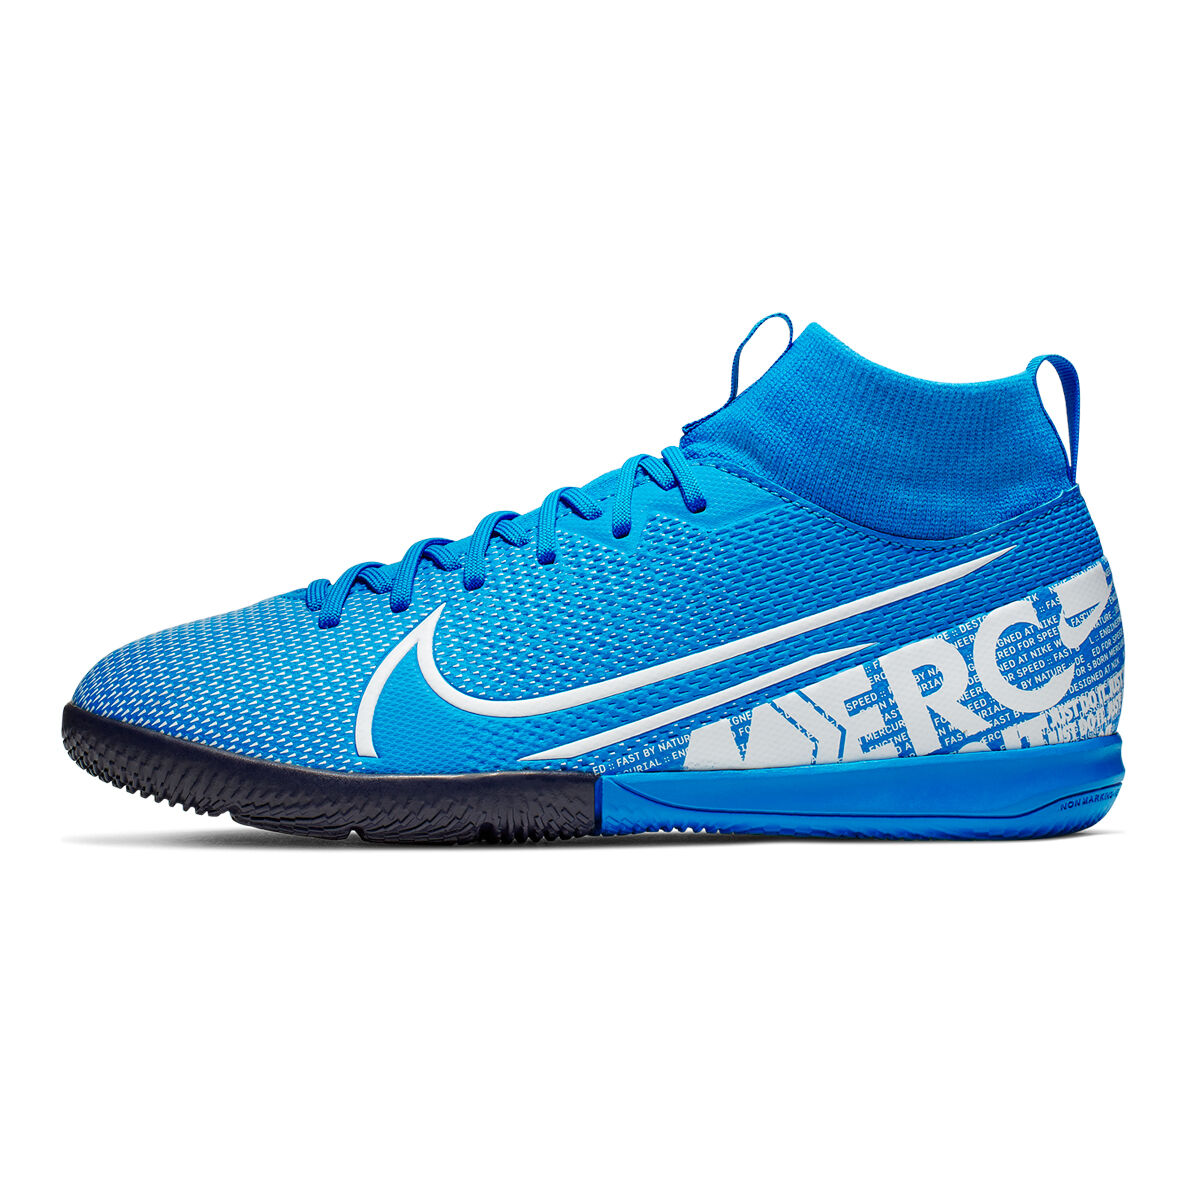 Nike Mercurial Superfly VI Academy MG Soccer Cleats.